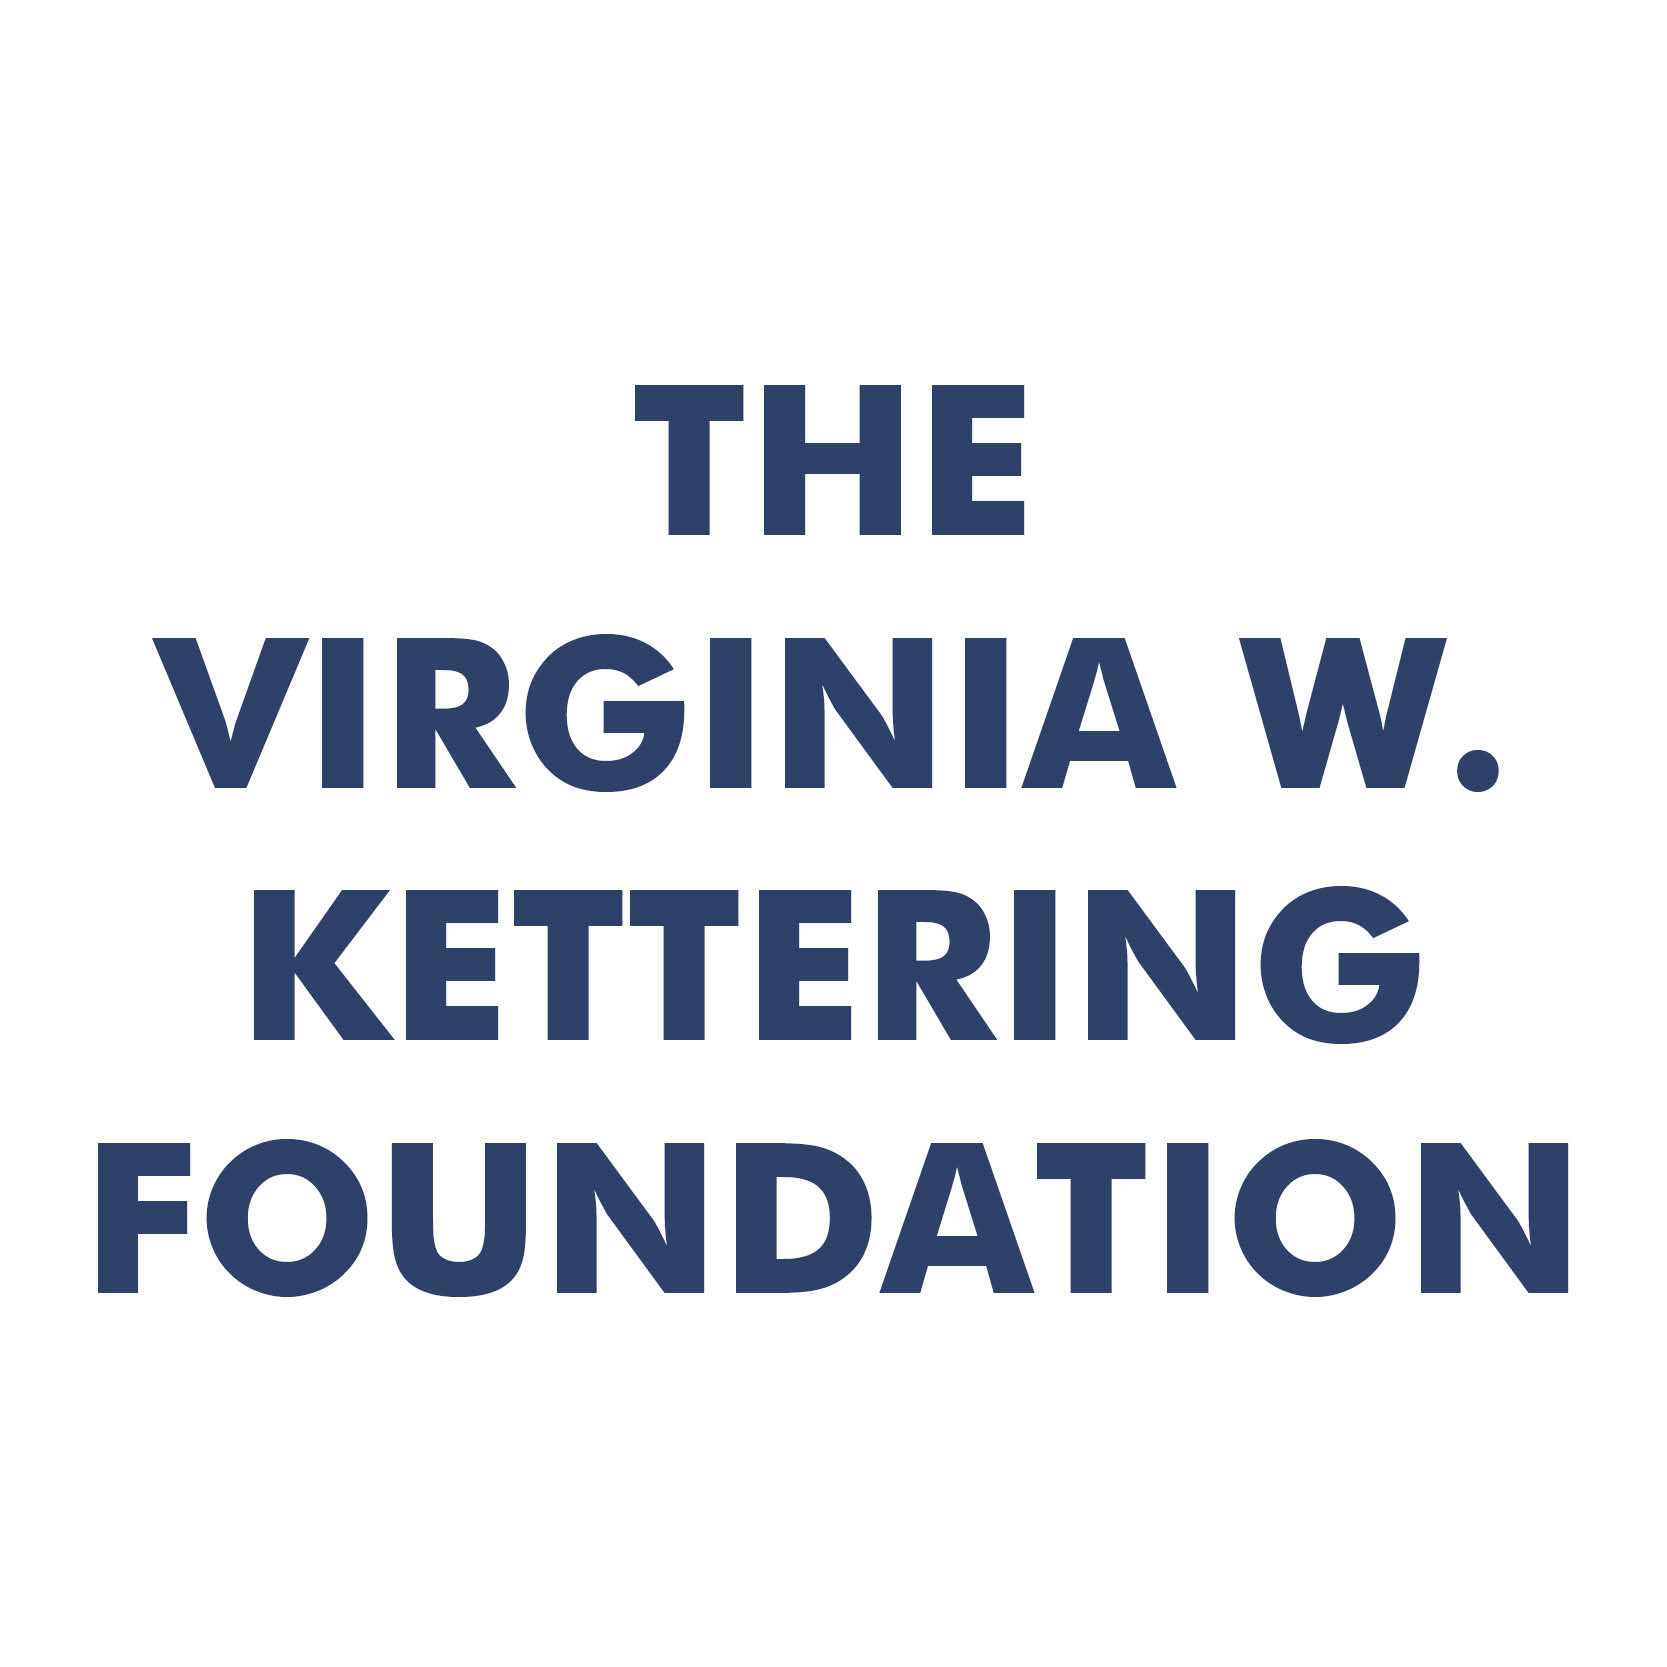 The virginia w kettering foundation